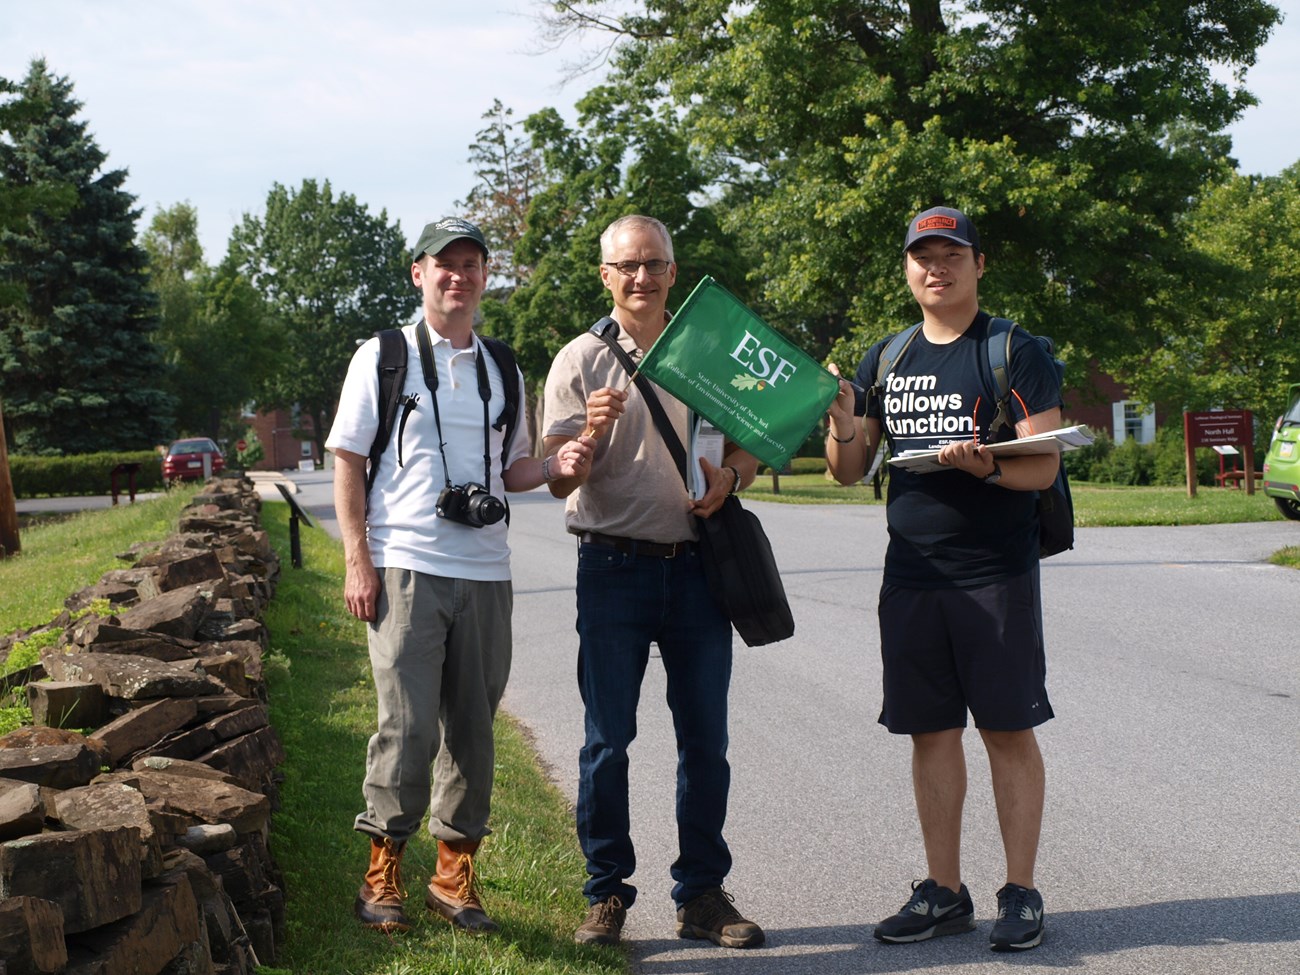 Three men, one with a camera and one with an "ESF" flag, beside a low stone wall.